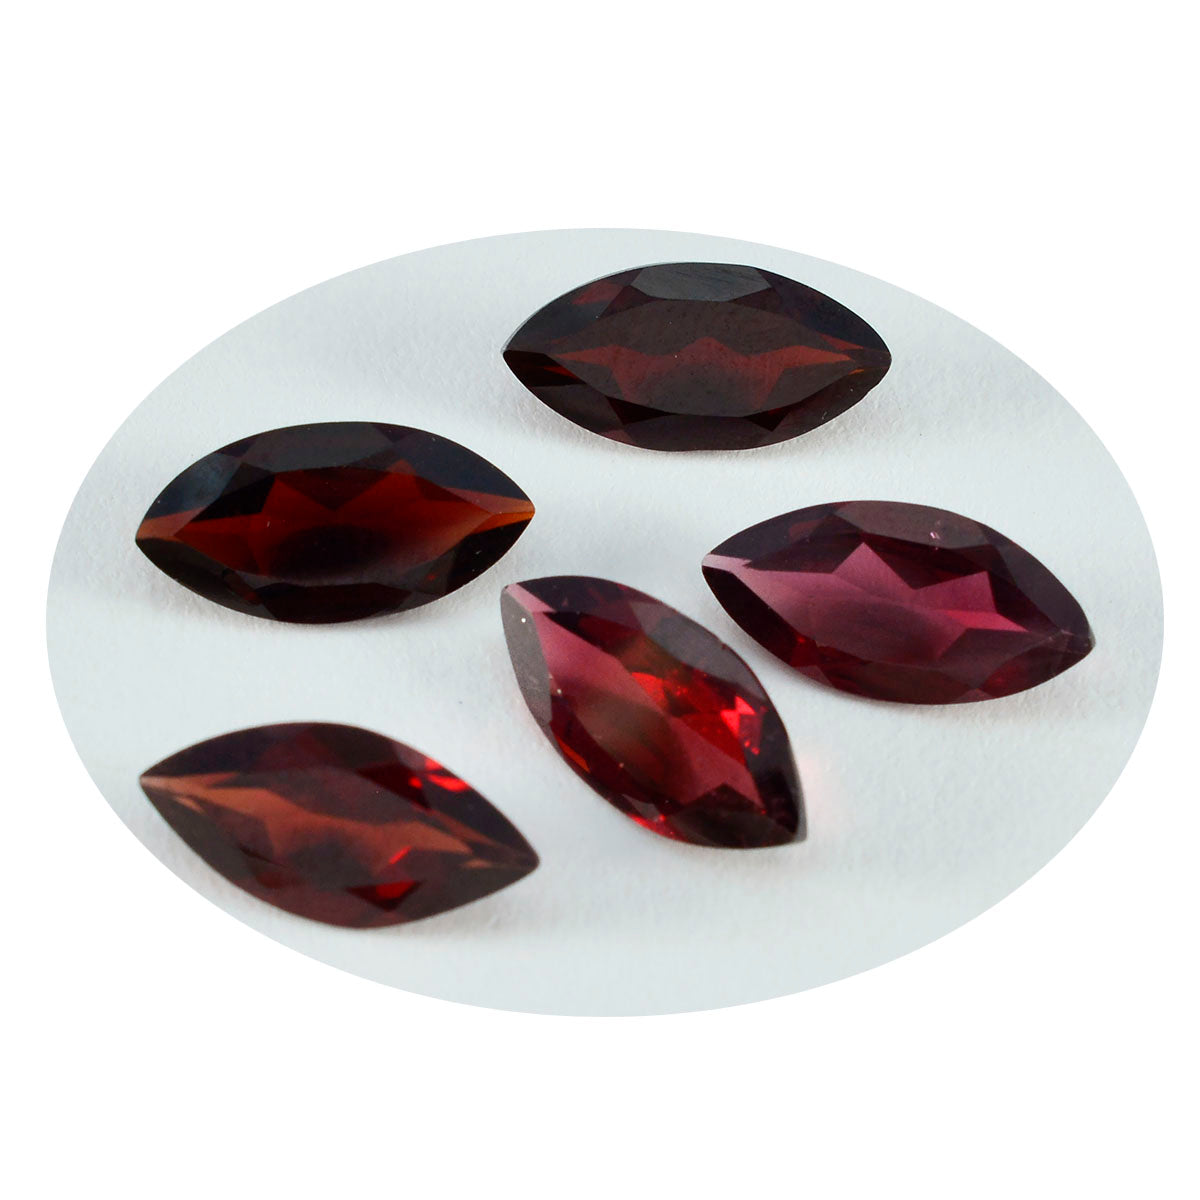 Riyogems 1PC Natural Red Garnet Faceted 11x22 mm Marquise Shape AAA Quality Loose Stone